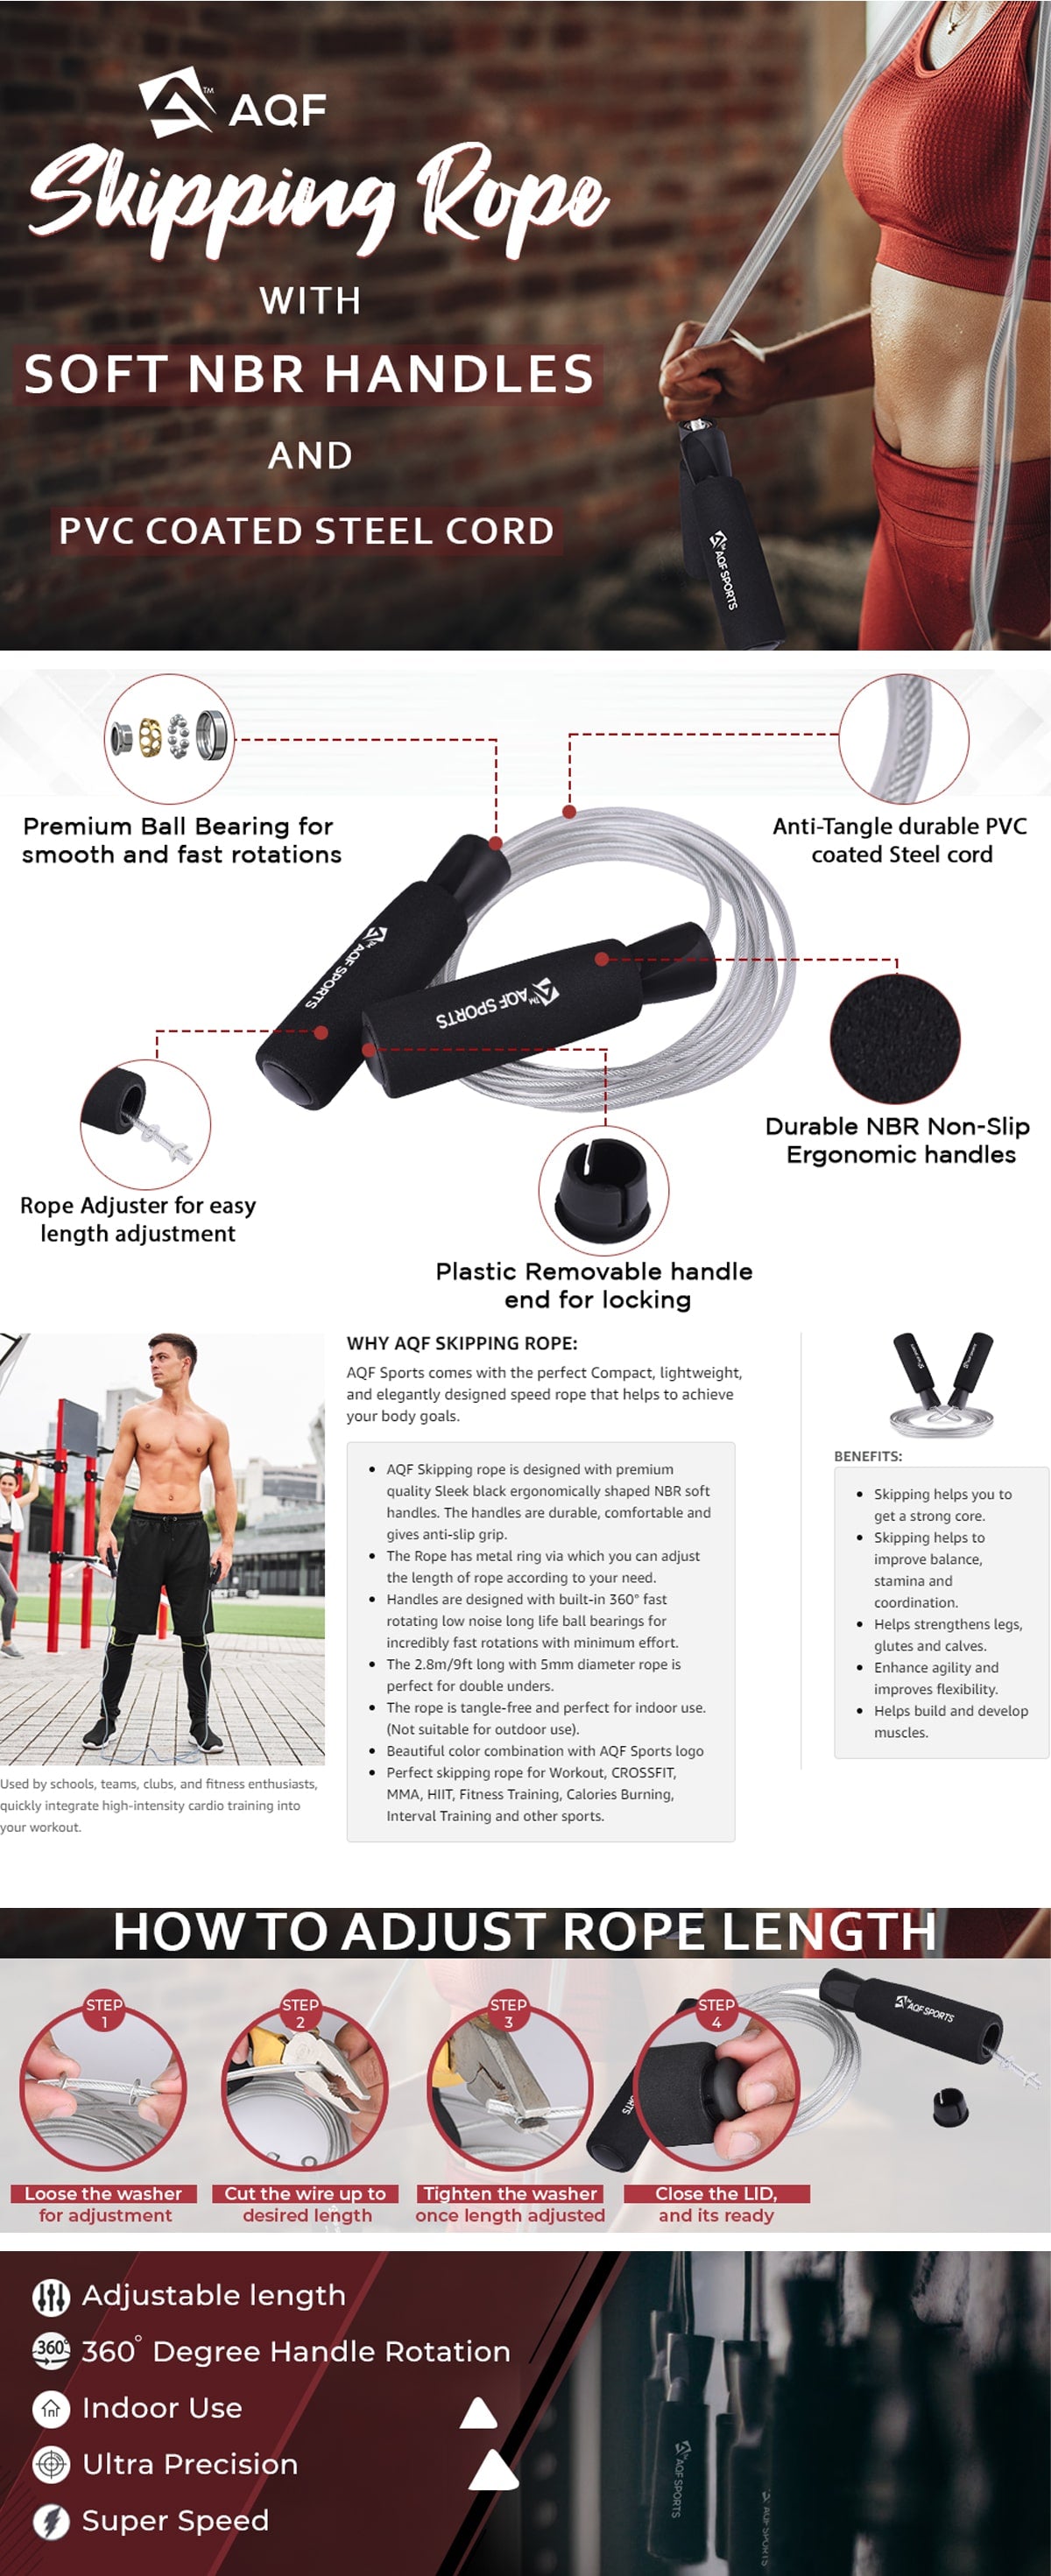 Features of Skipping Rope - AQF Sports